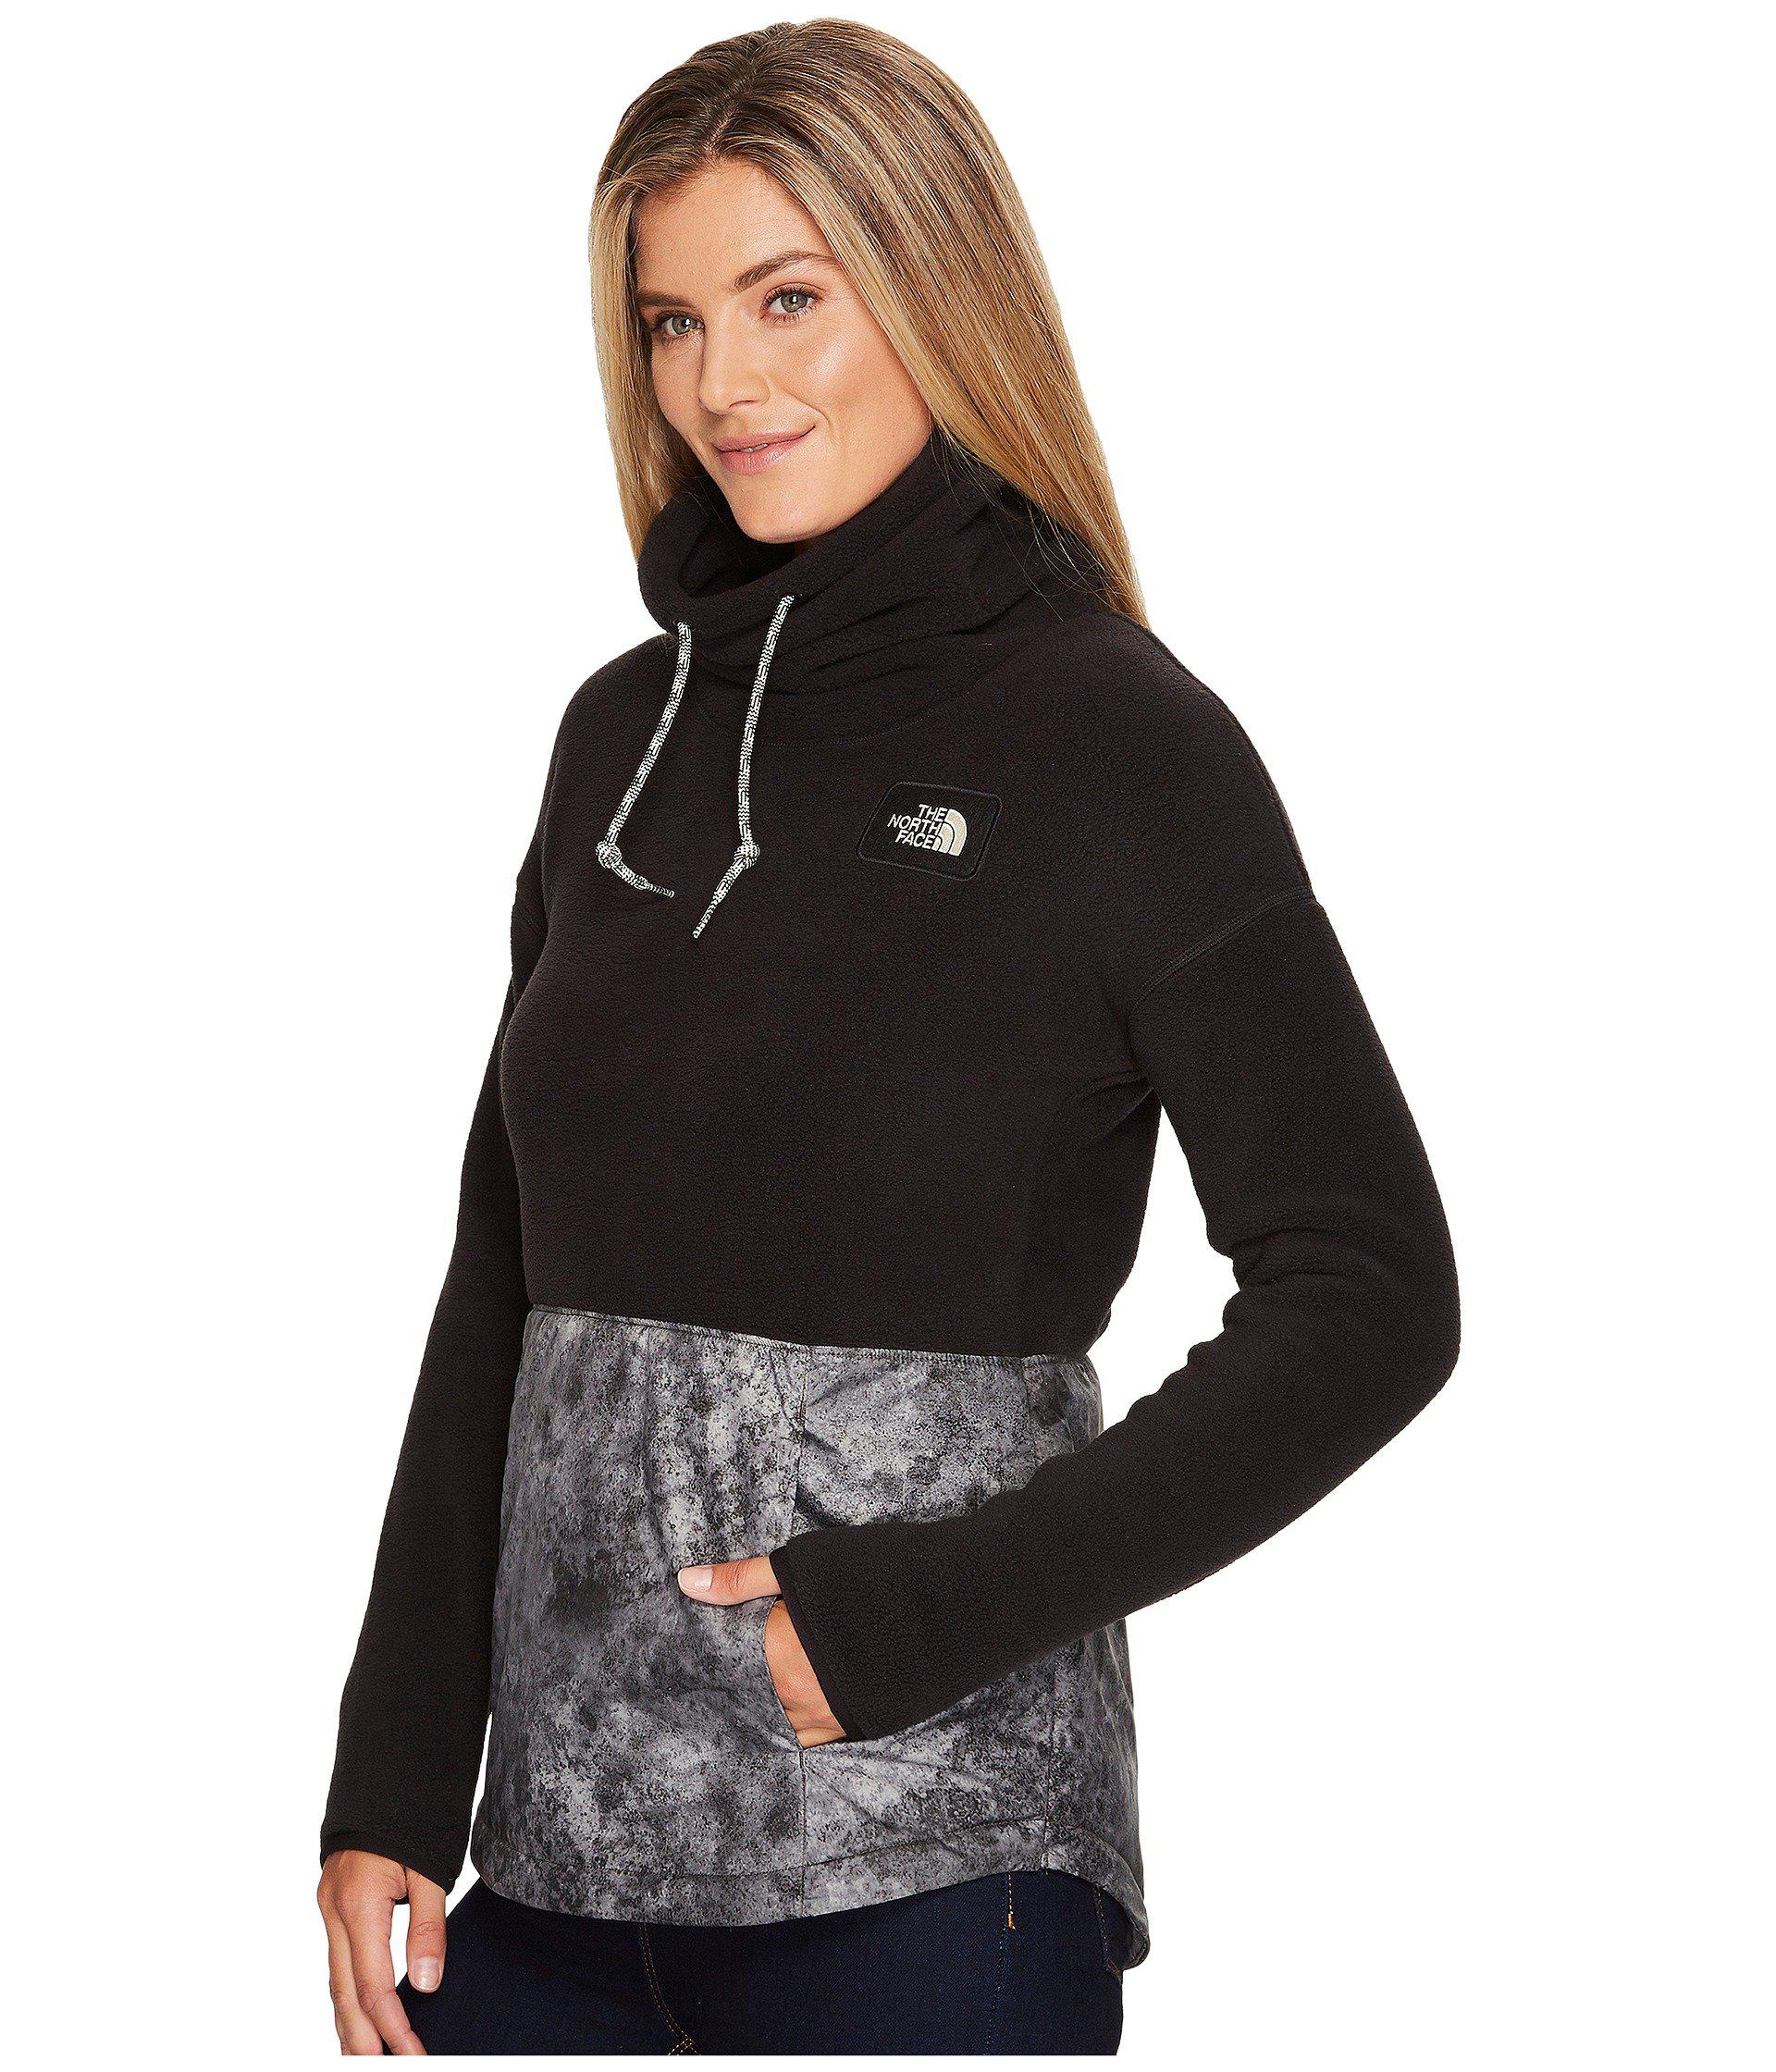 women's riit pullover north face